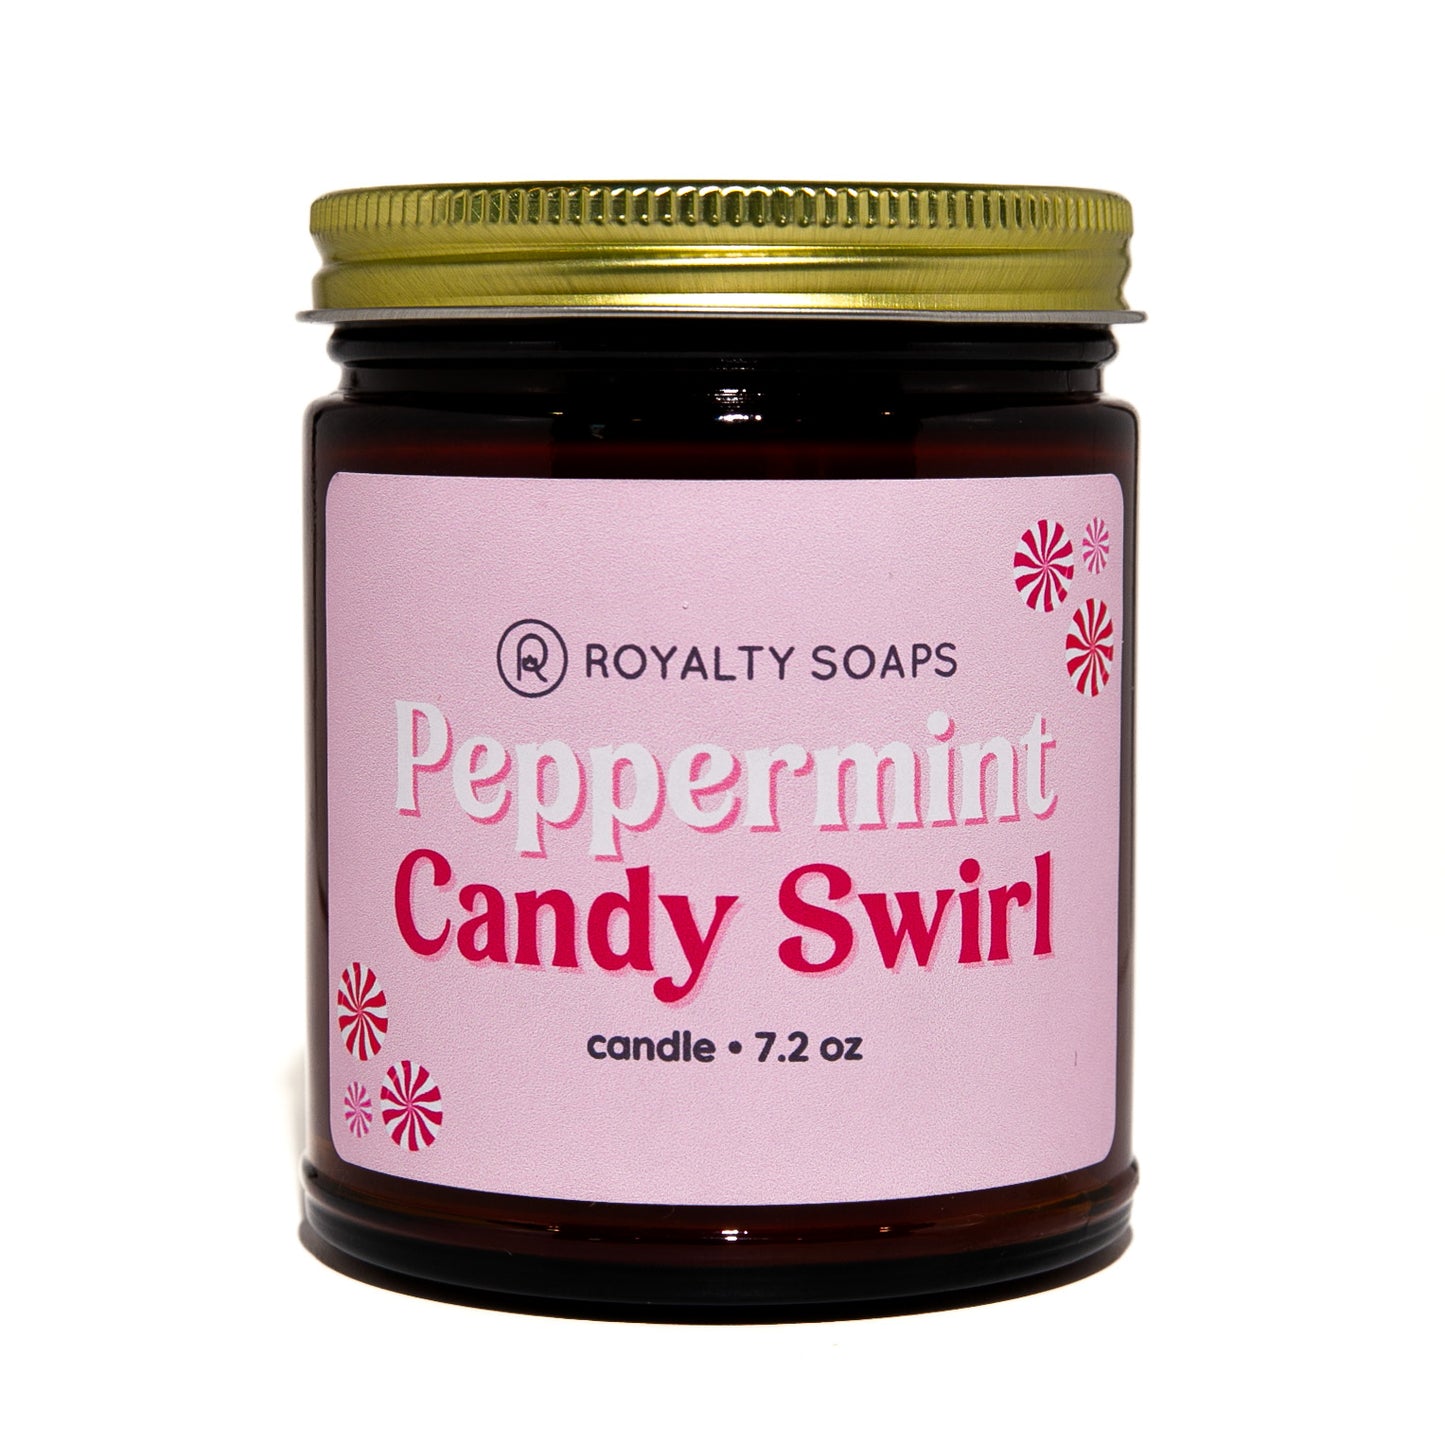 Peppermint Candy Swirl Soy Candle